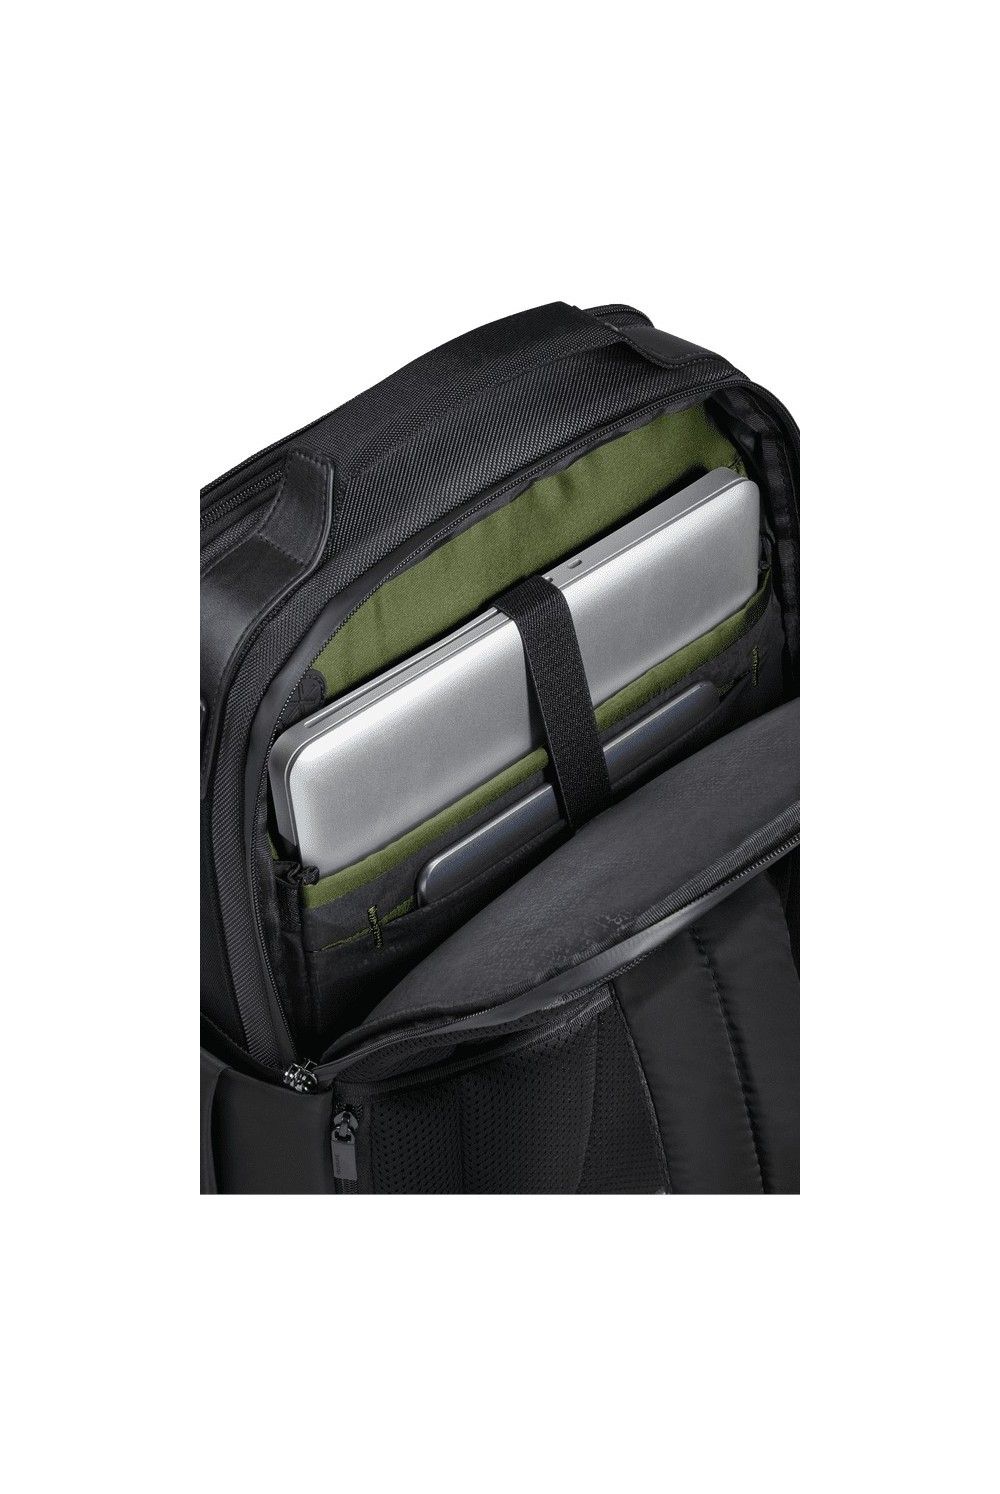 Samsonite Openroad 2.0 laptop backpack 14.1 inches